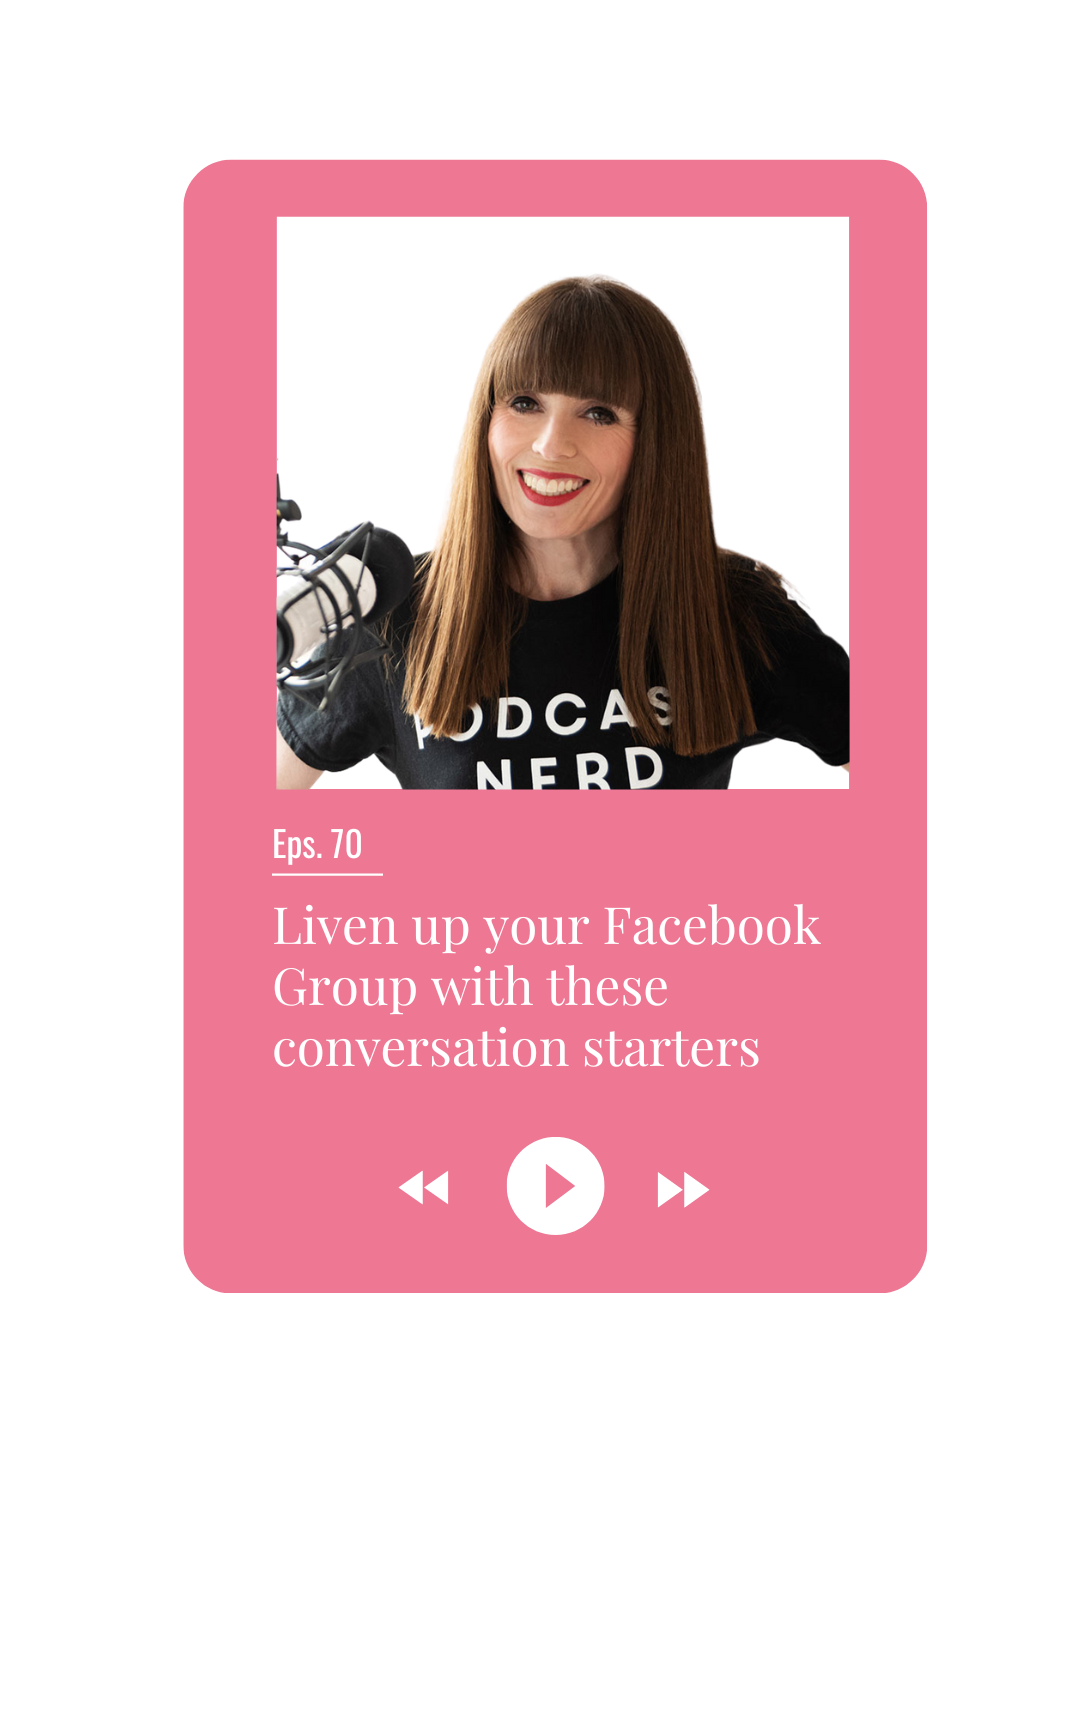 Liven up your Facebook Group with these conversation starters